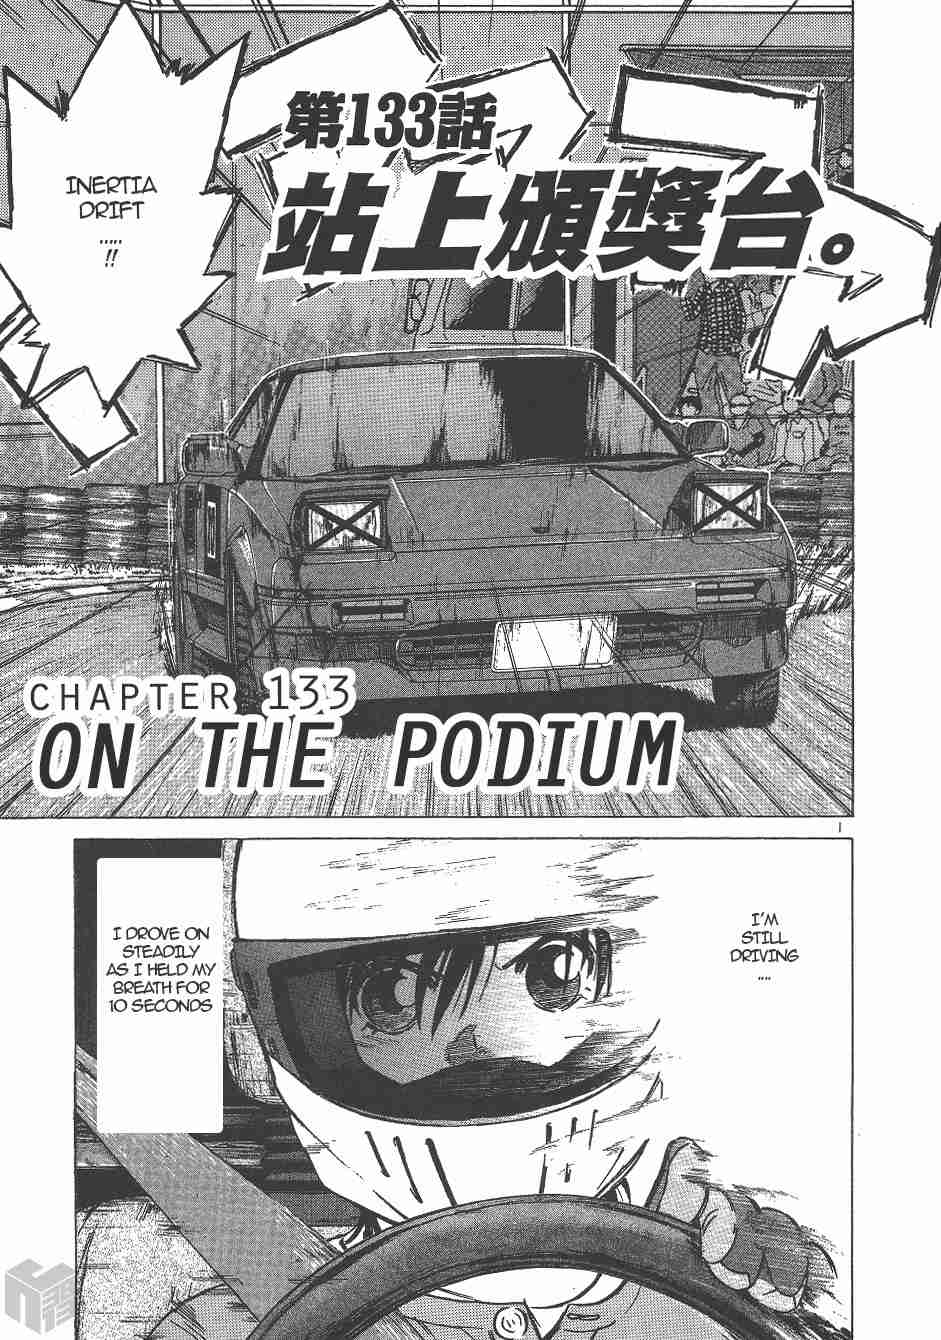 Over Rev! Vol. 12 Ch. 133 On the Podium